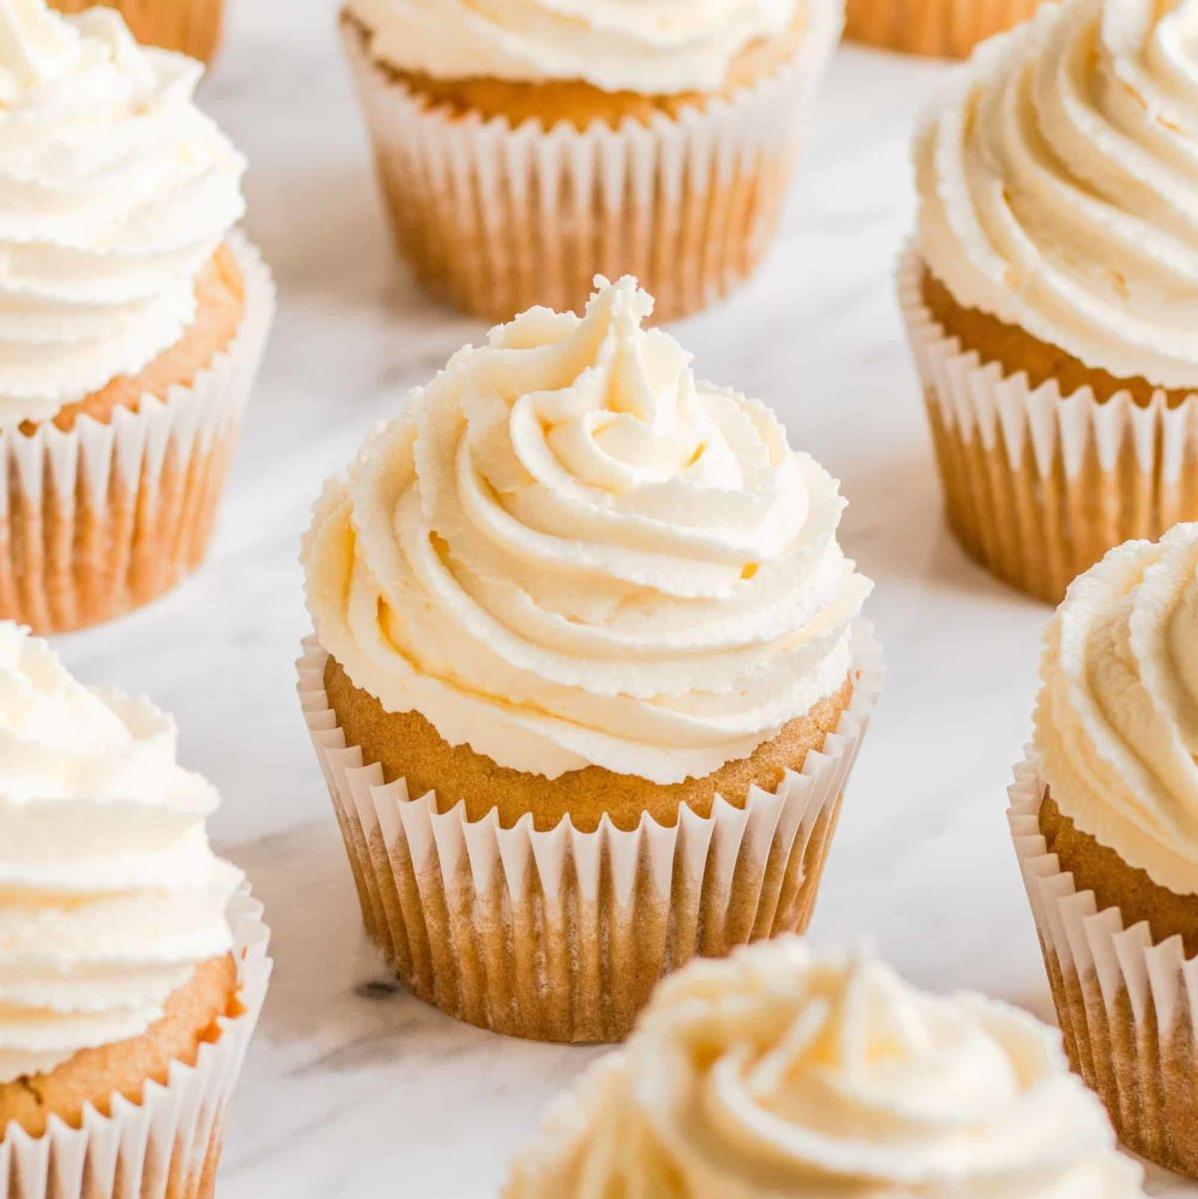  These Dairy-free Vanilla Cupcakes will make your taste buds dance!